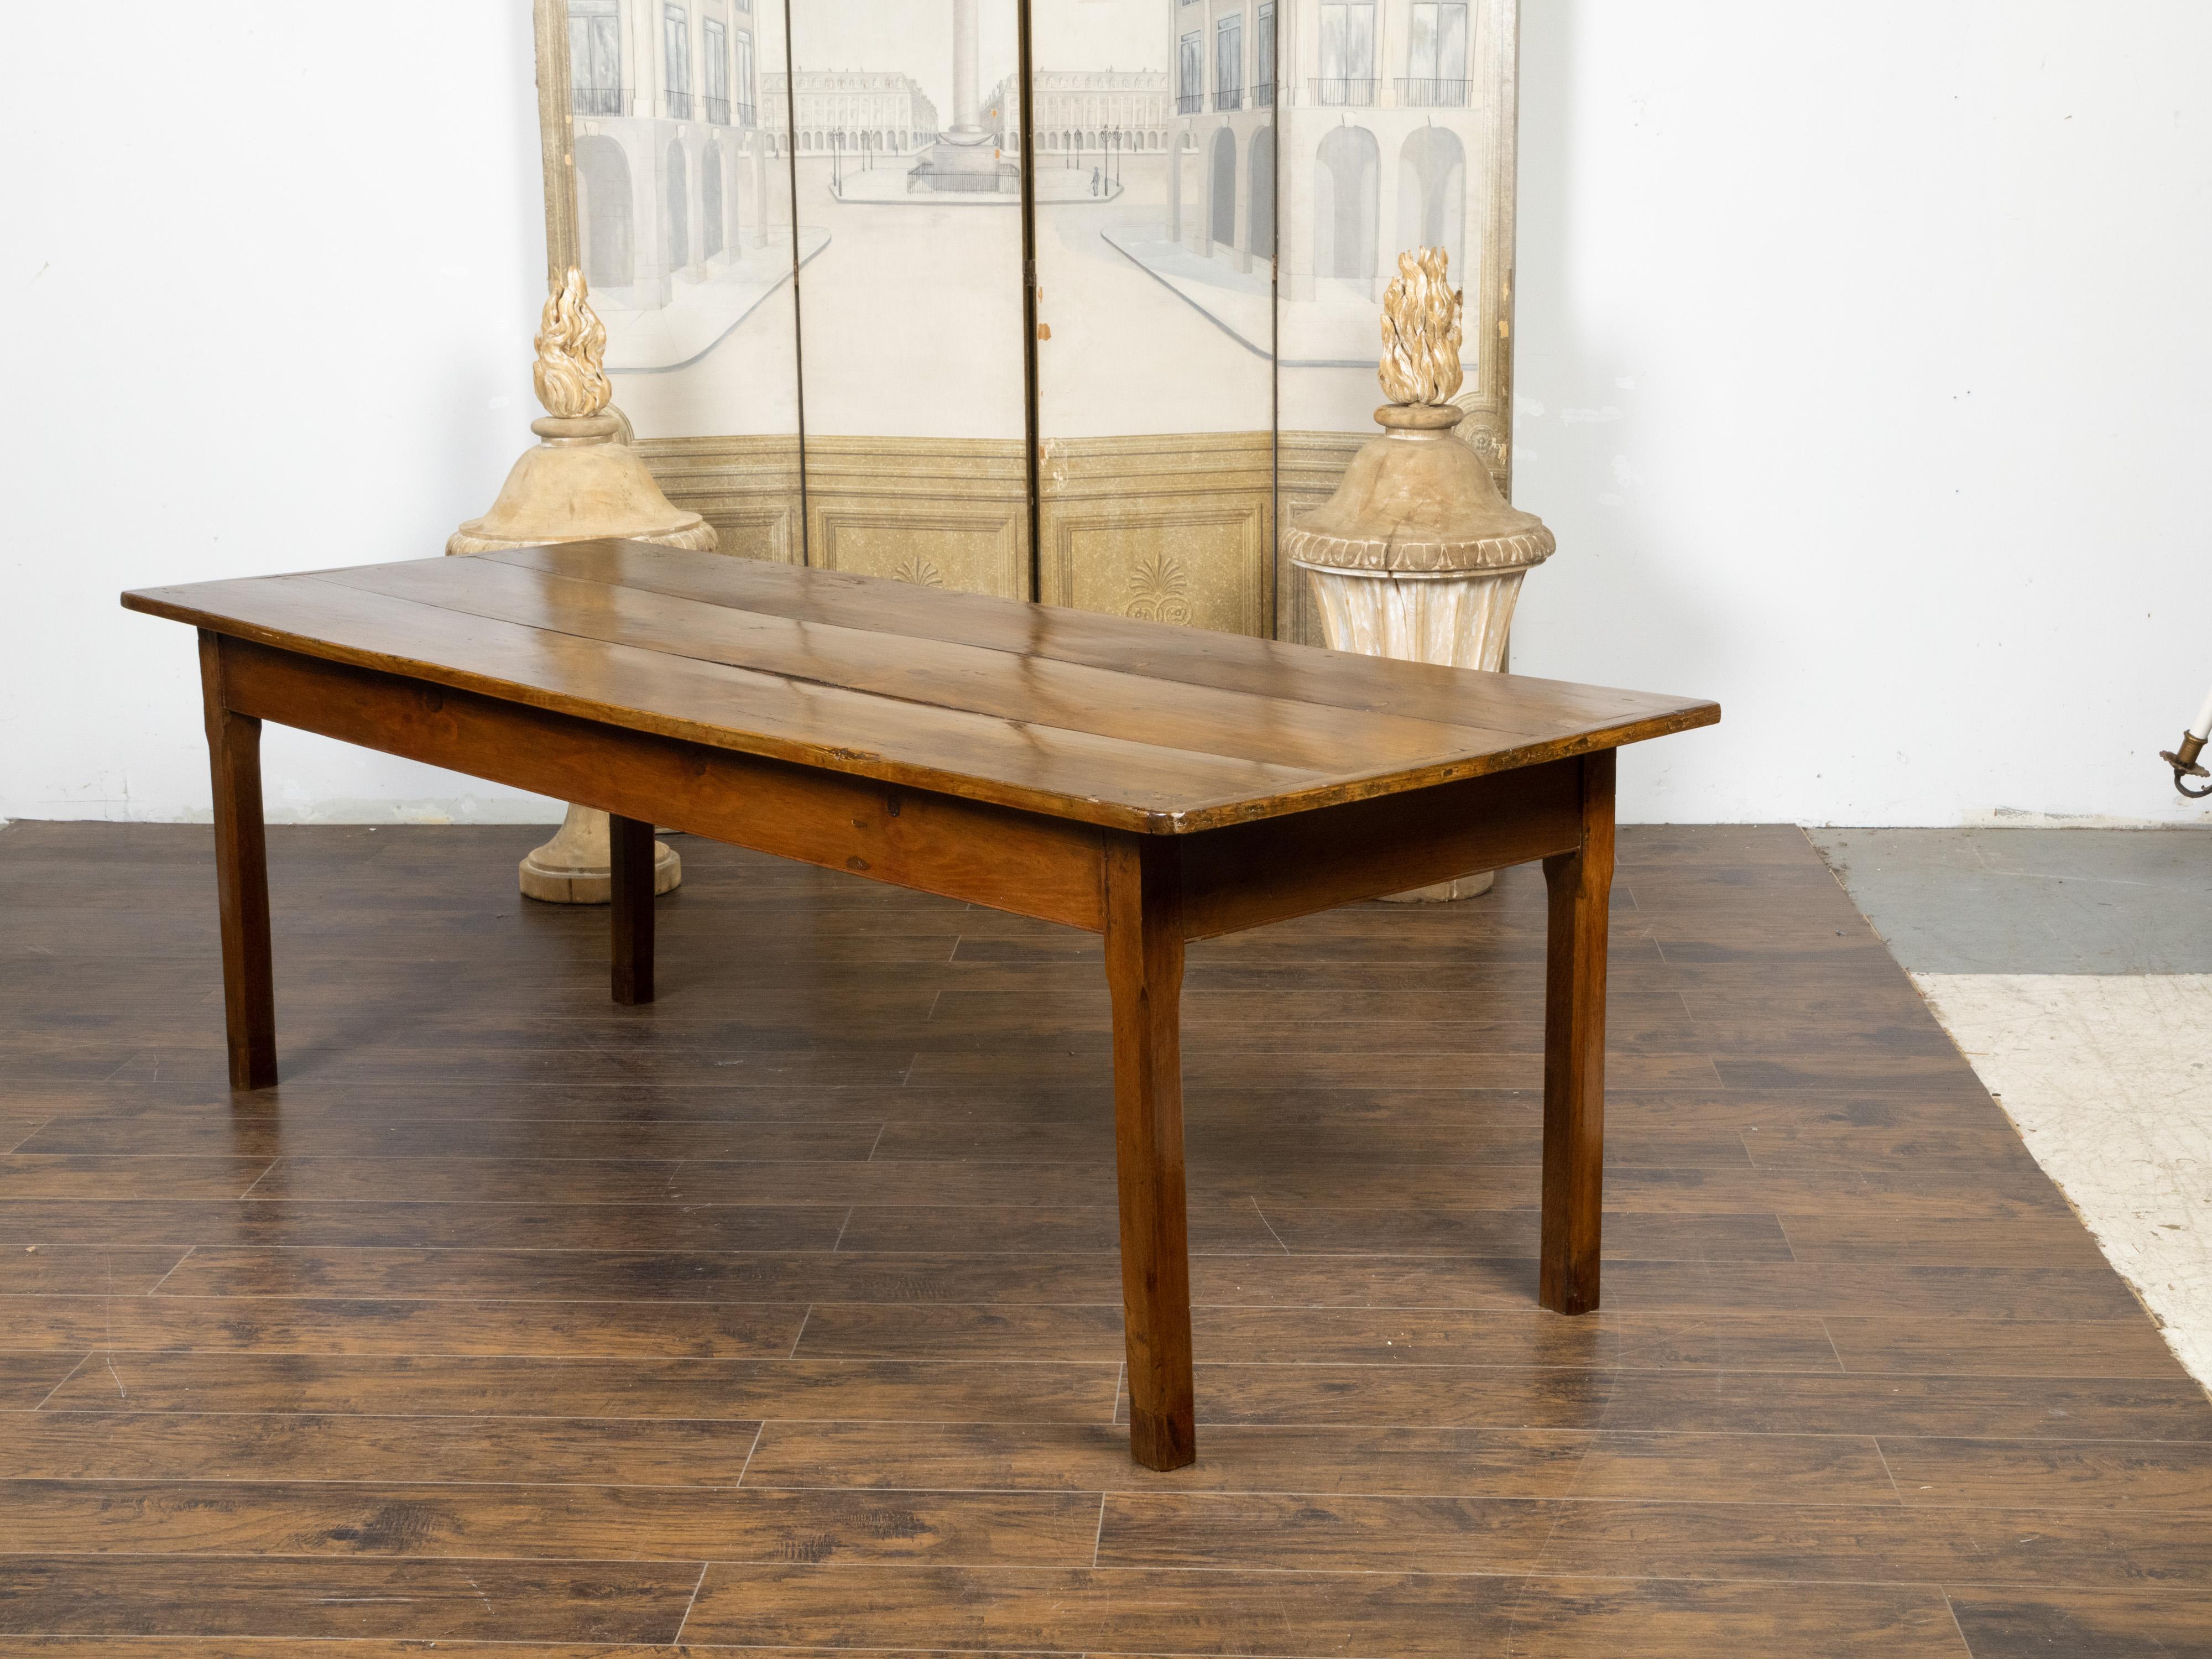 Country French Rustic Pine Farm Table with Straight Legs from the 19th Century For Sale 2